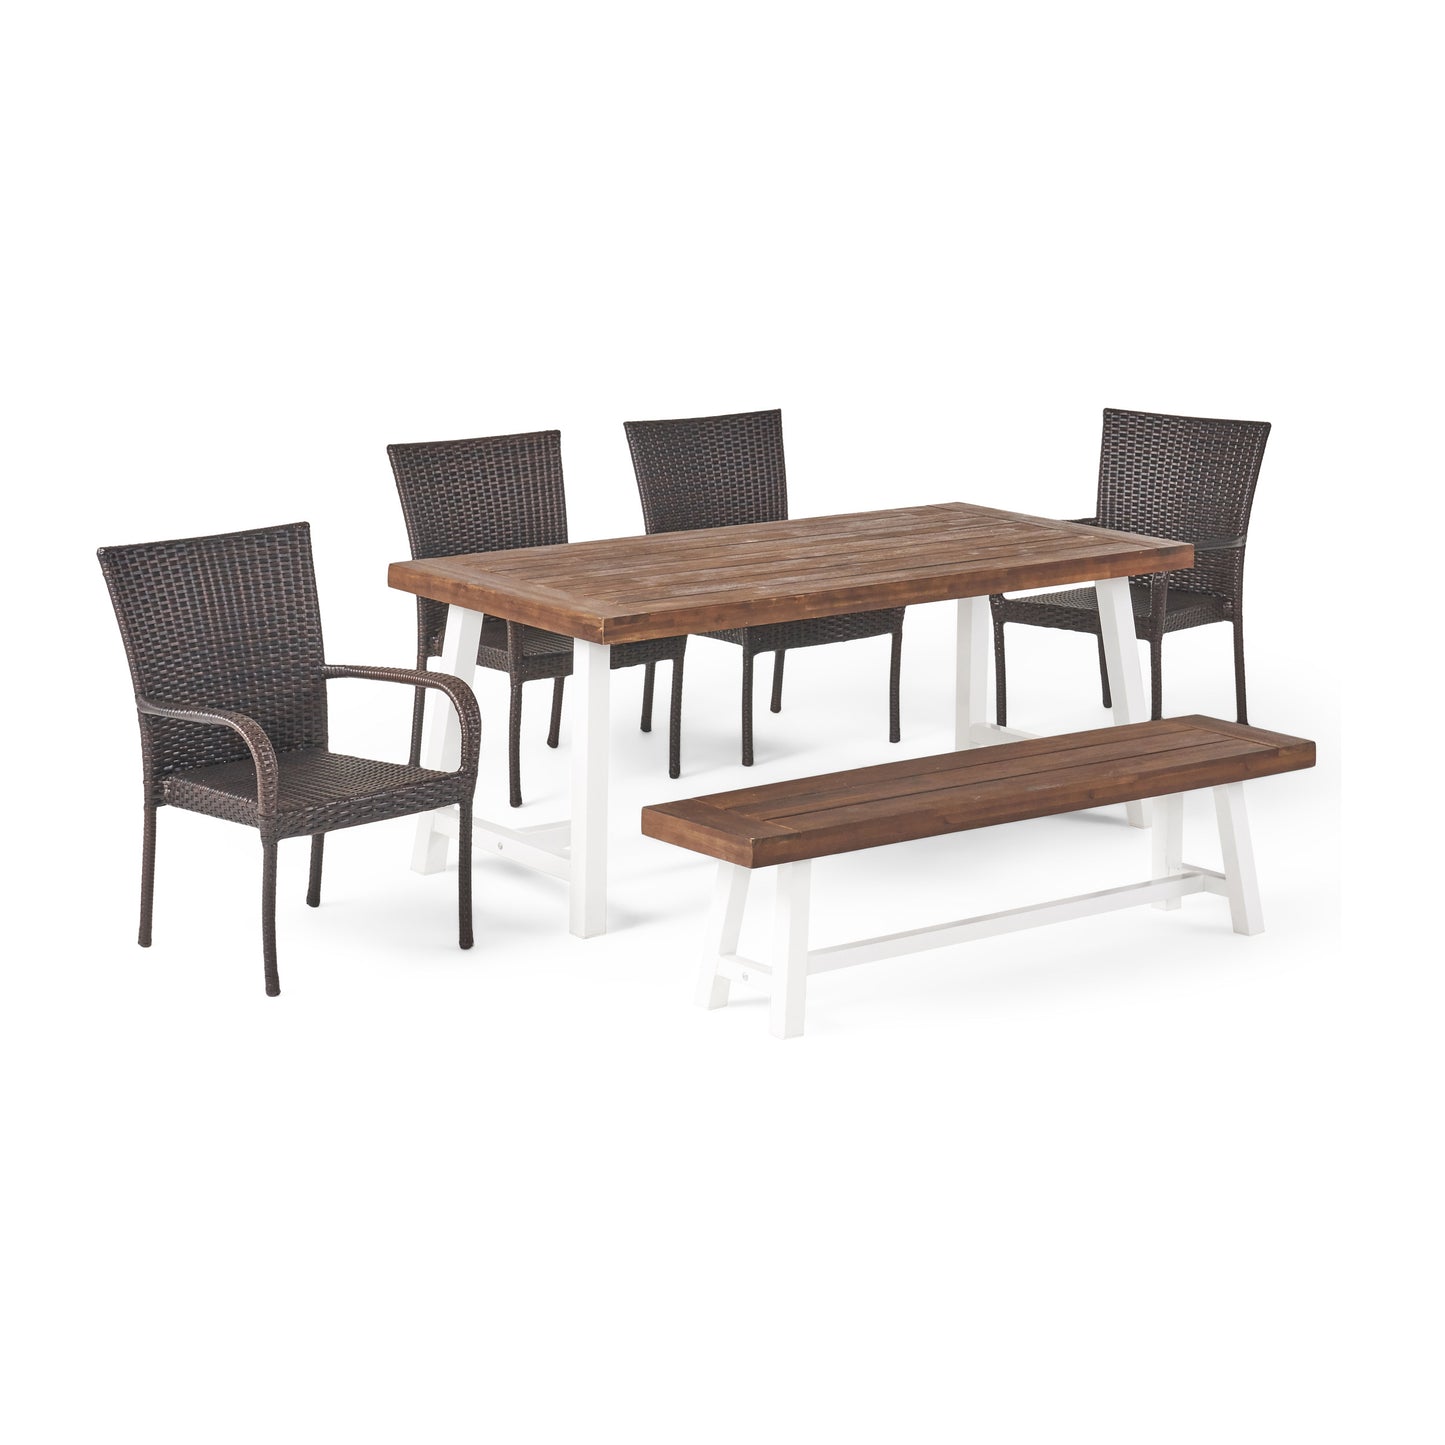 Luminous Outdoor 6 Piece Stacking Wicker Dining Set with Acacia Wood Table and Bench